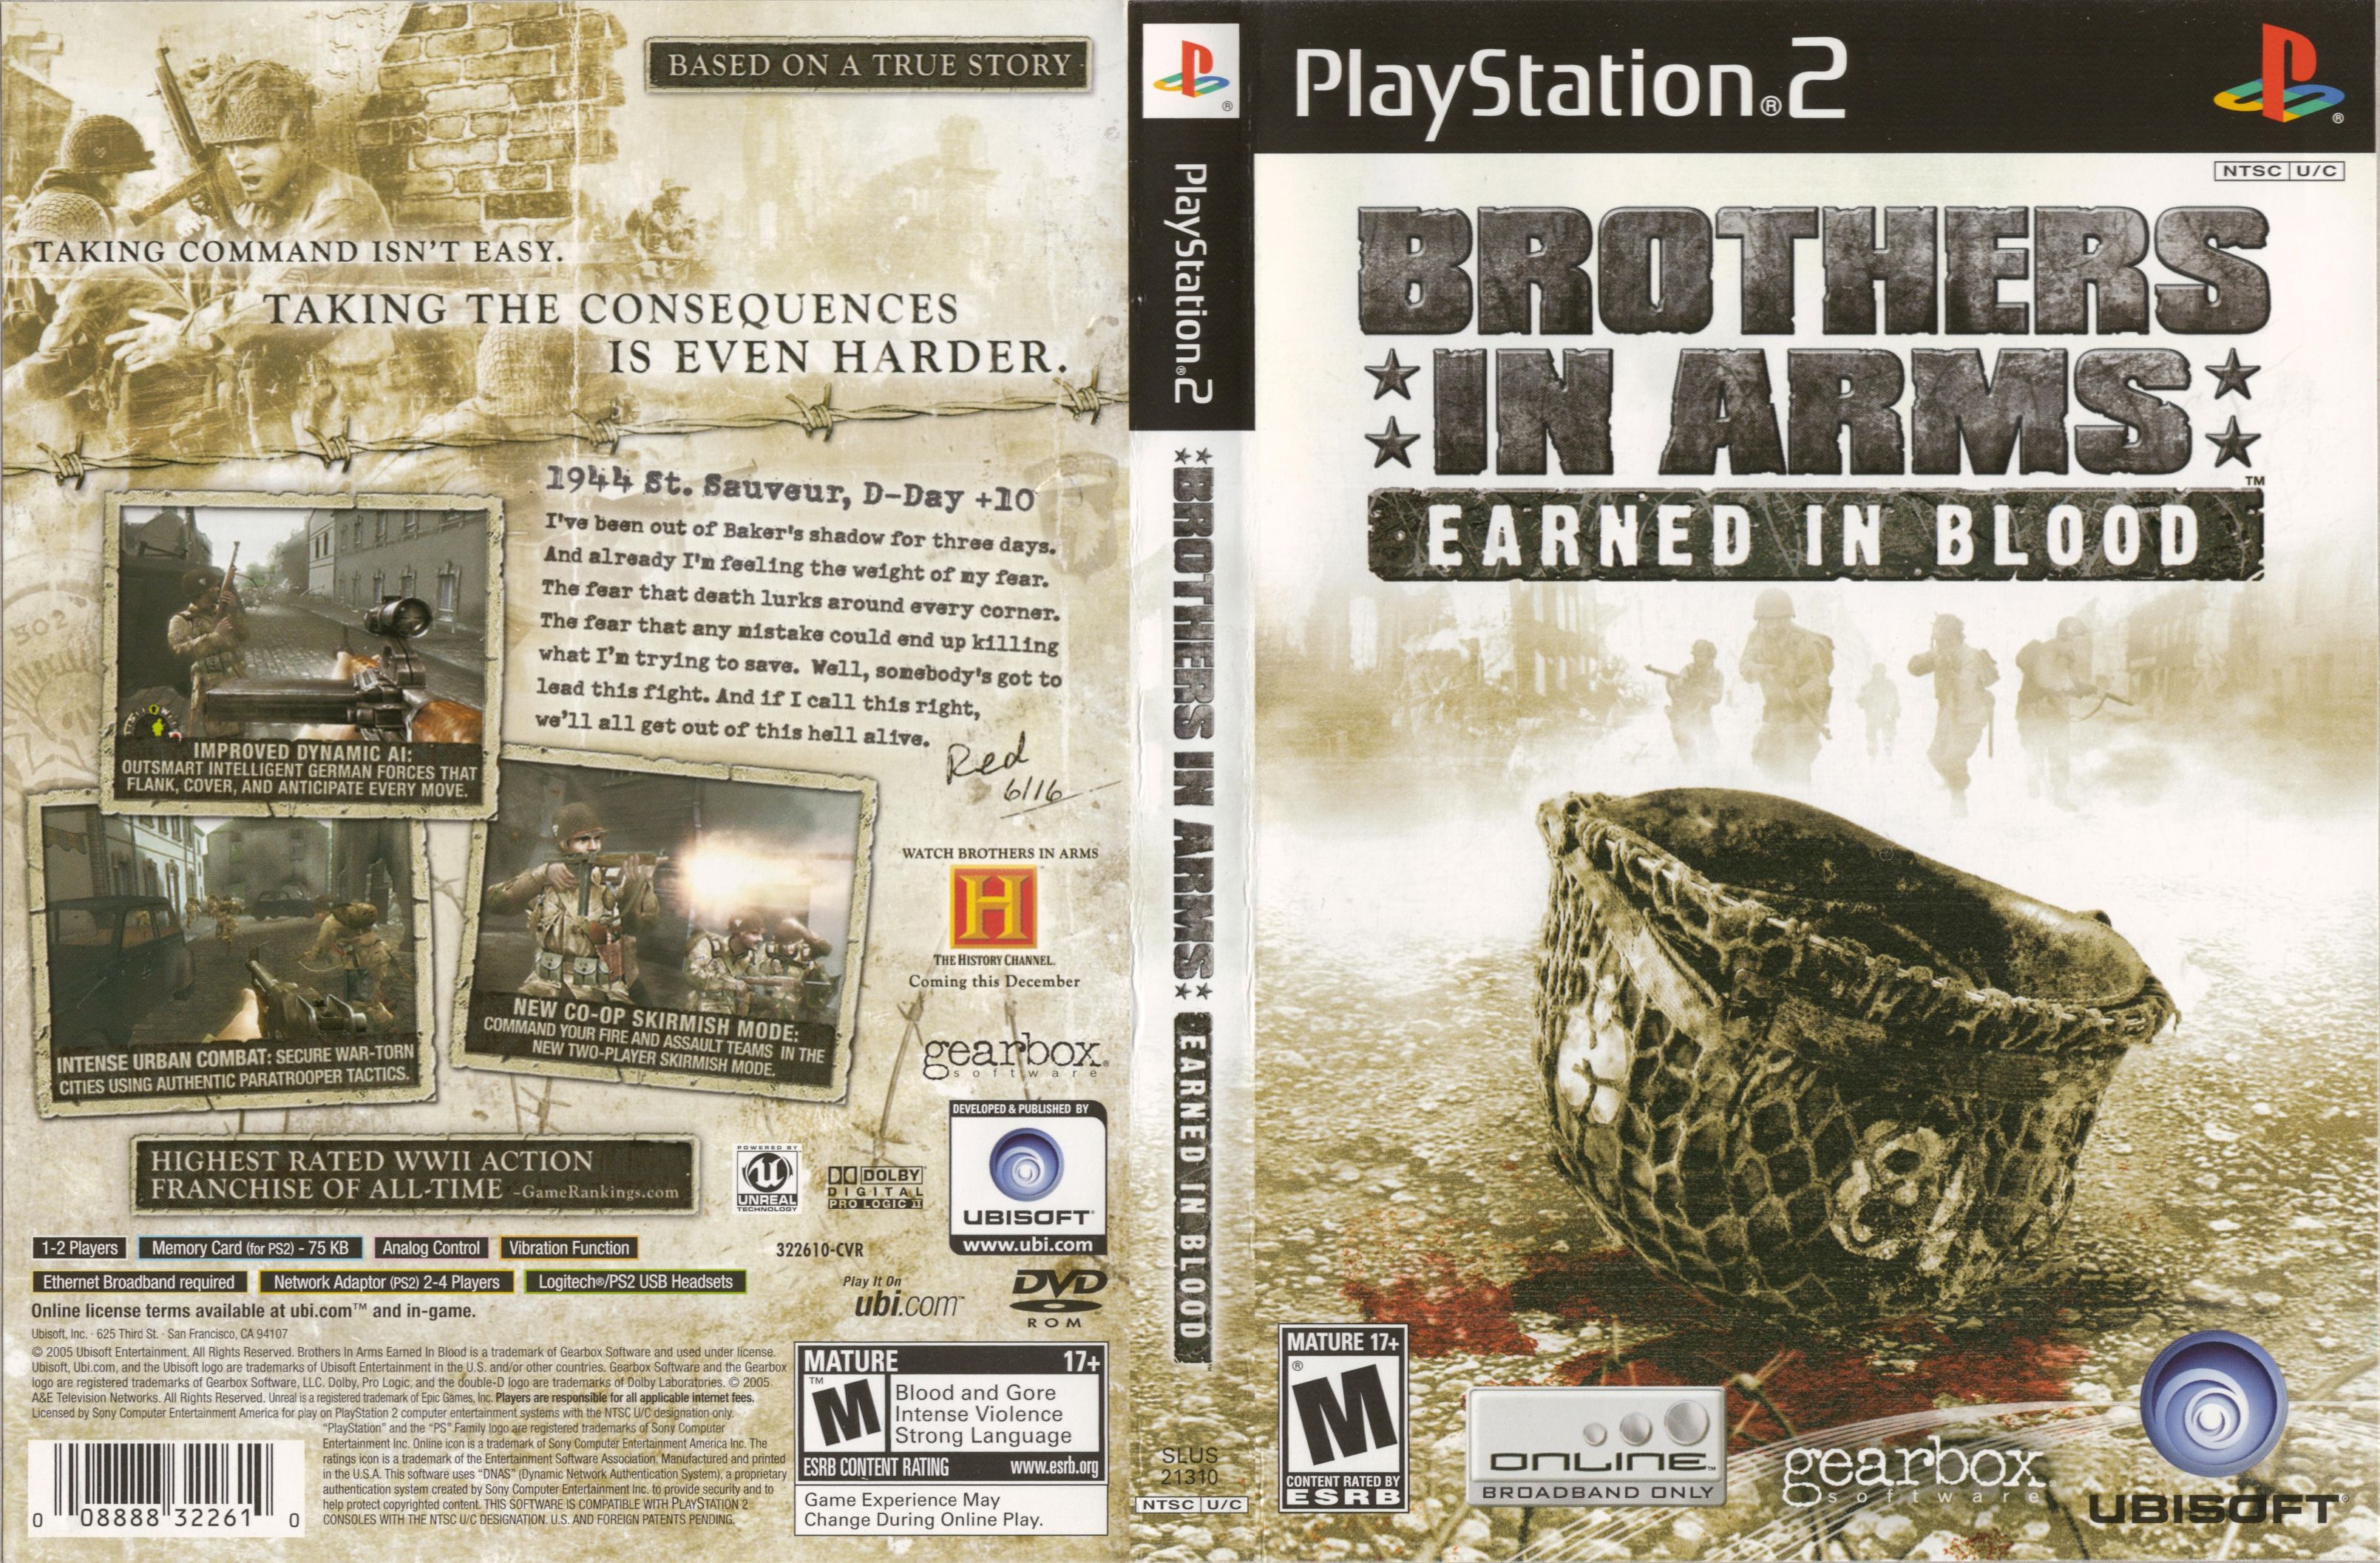 brothers in arms earned in blood ps2 cover